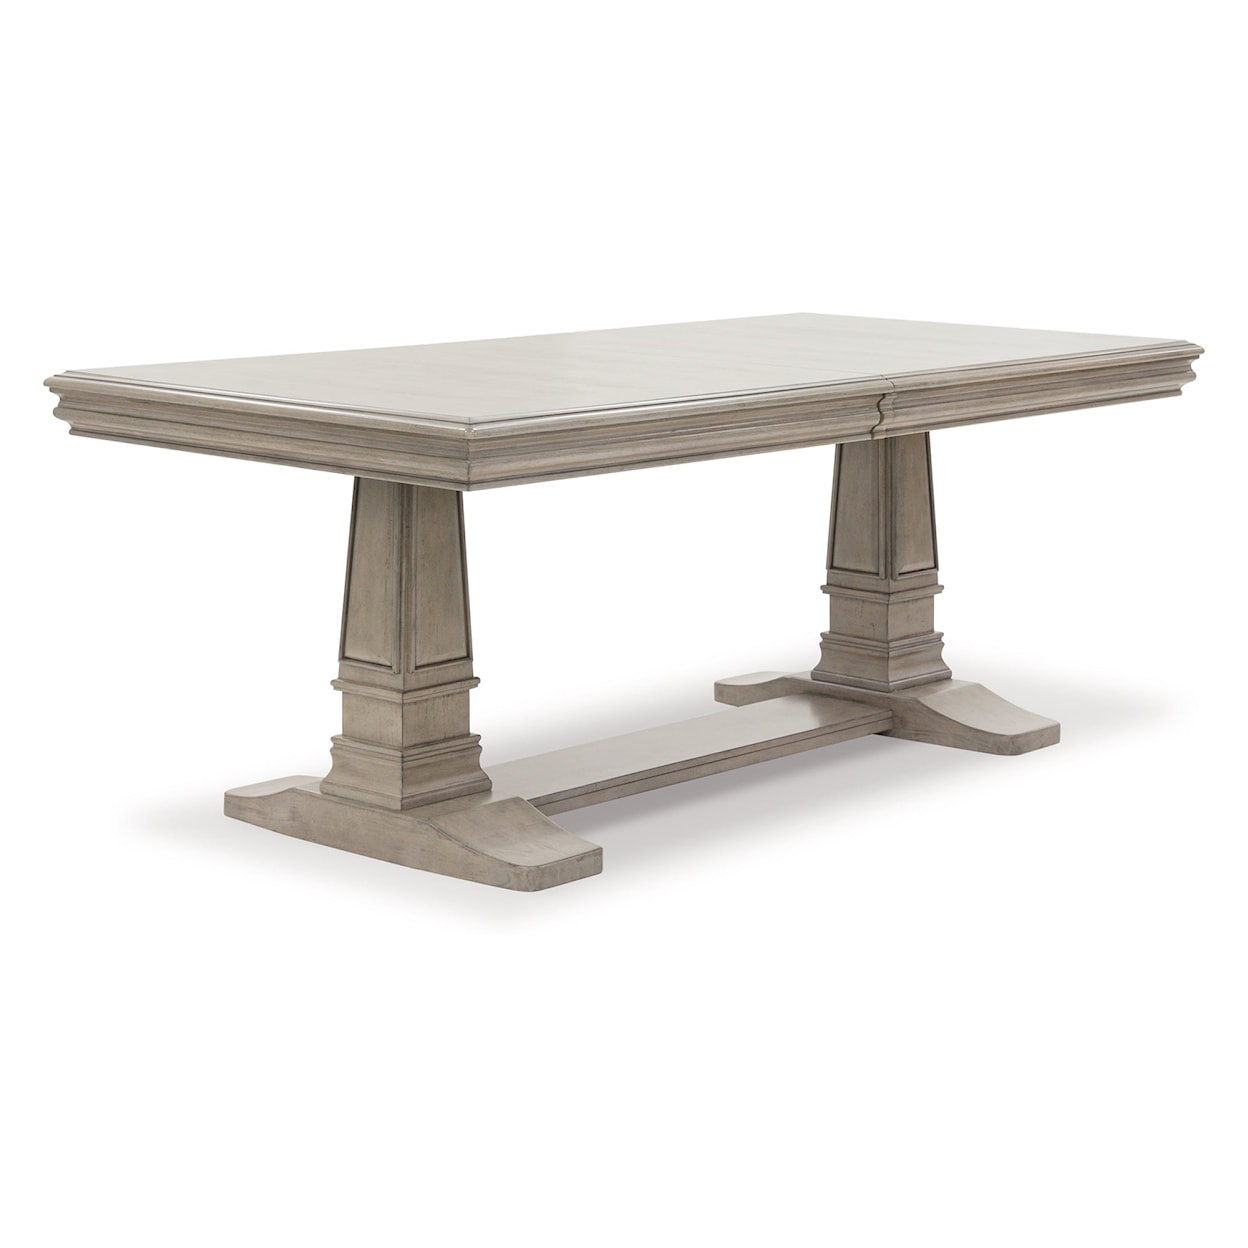 Signature Design by Ashley Lexorne Dining Extension Table